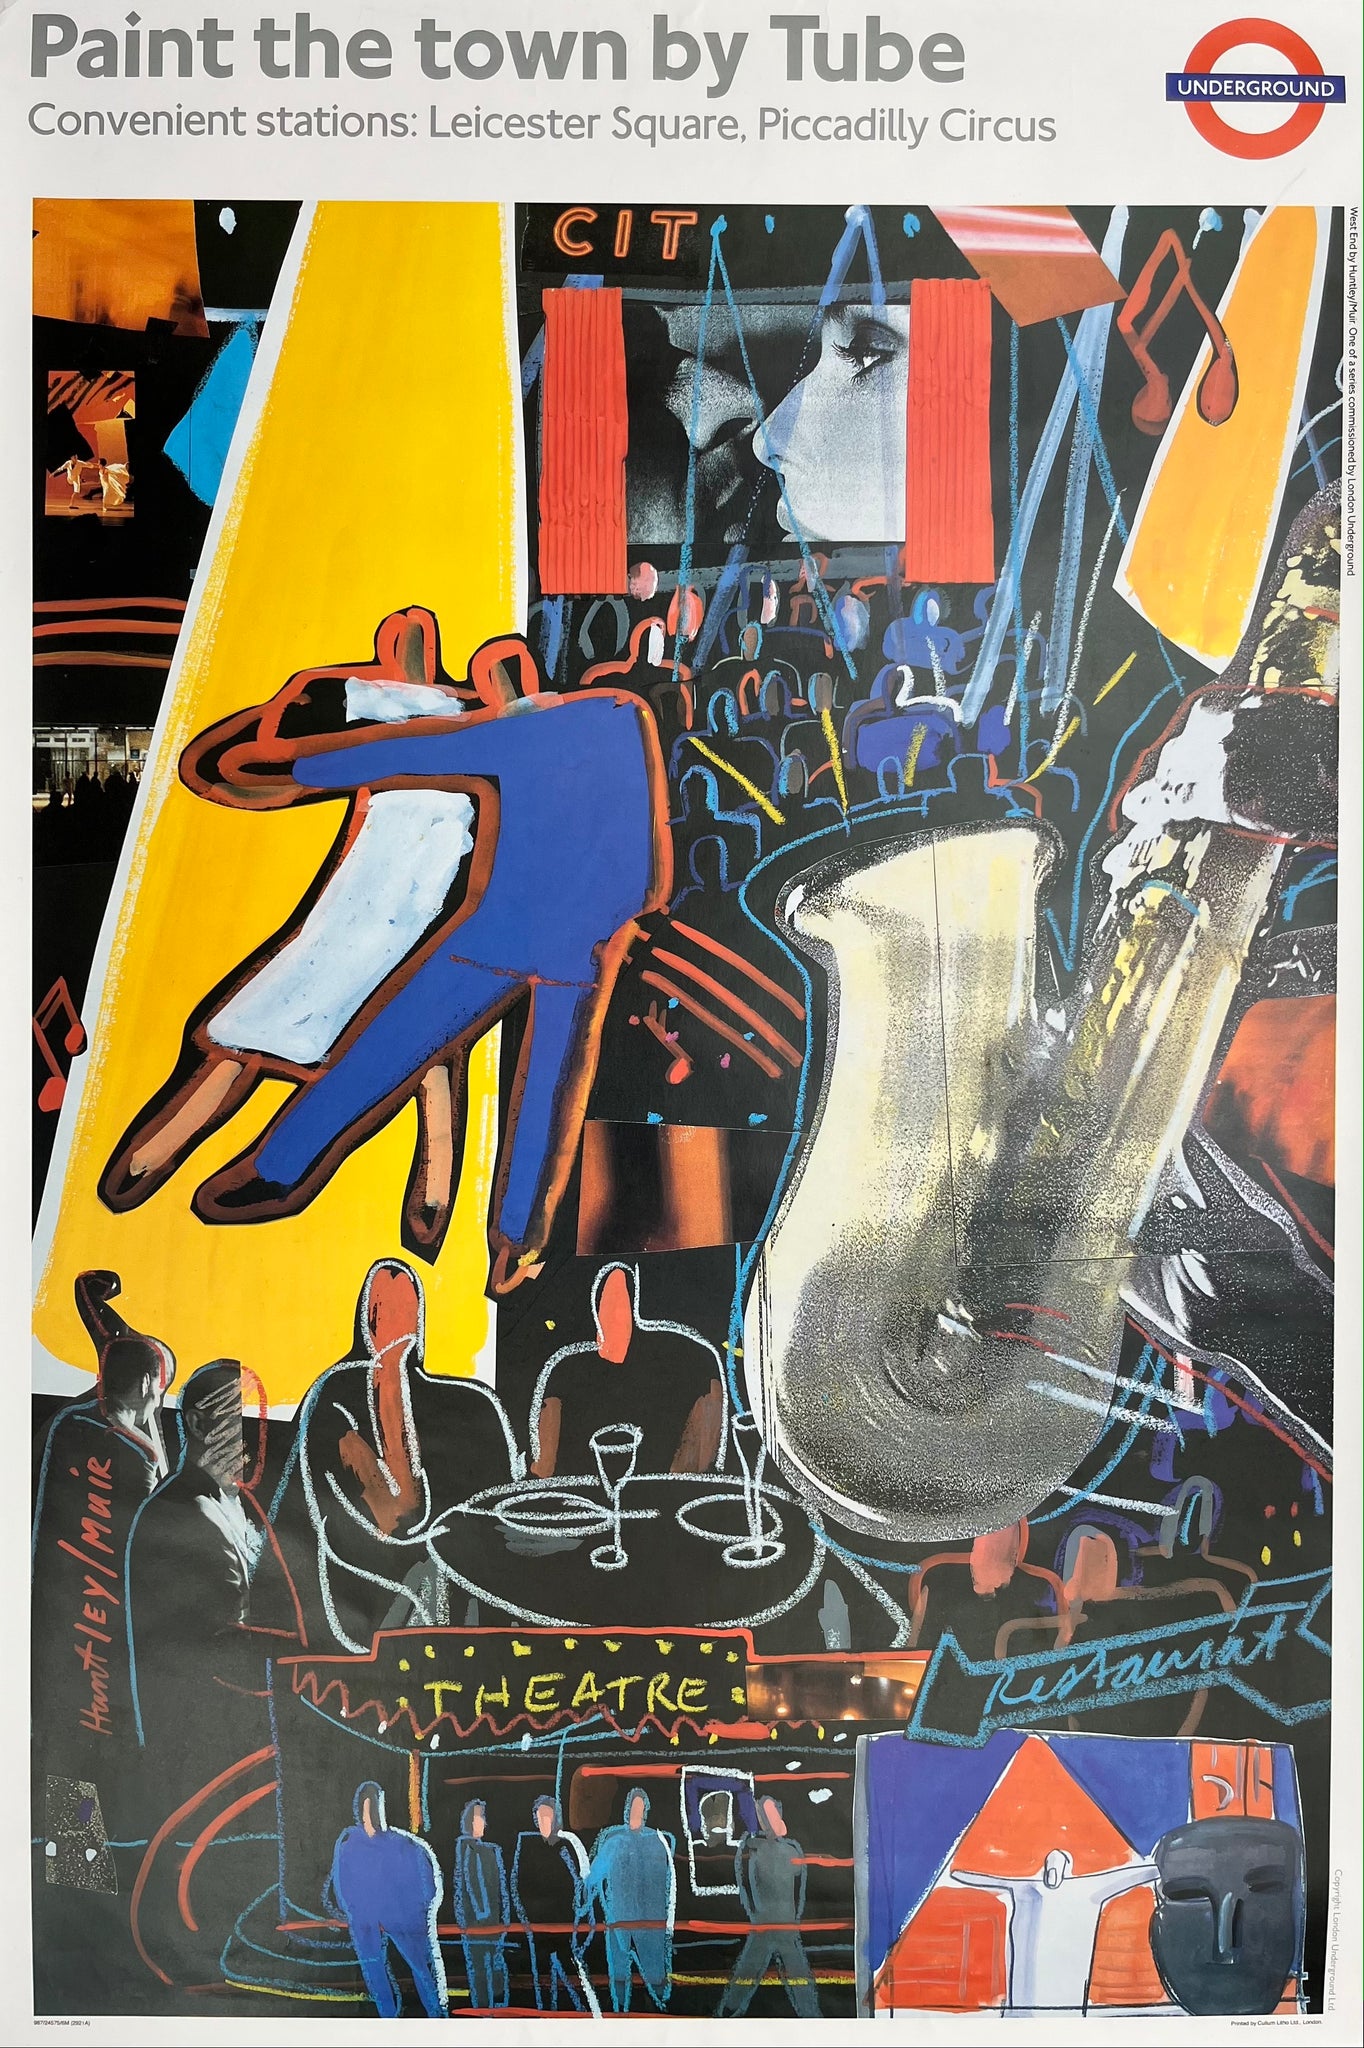 London Transport Poster - Paint the town by Tube